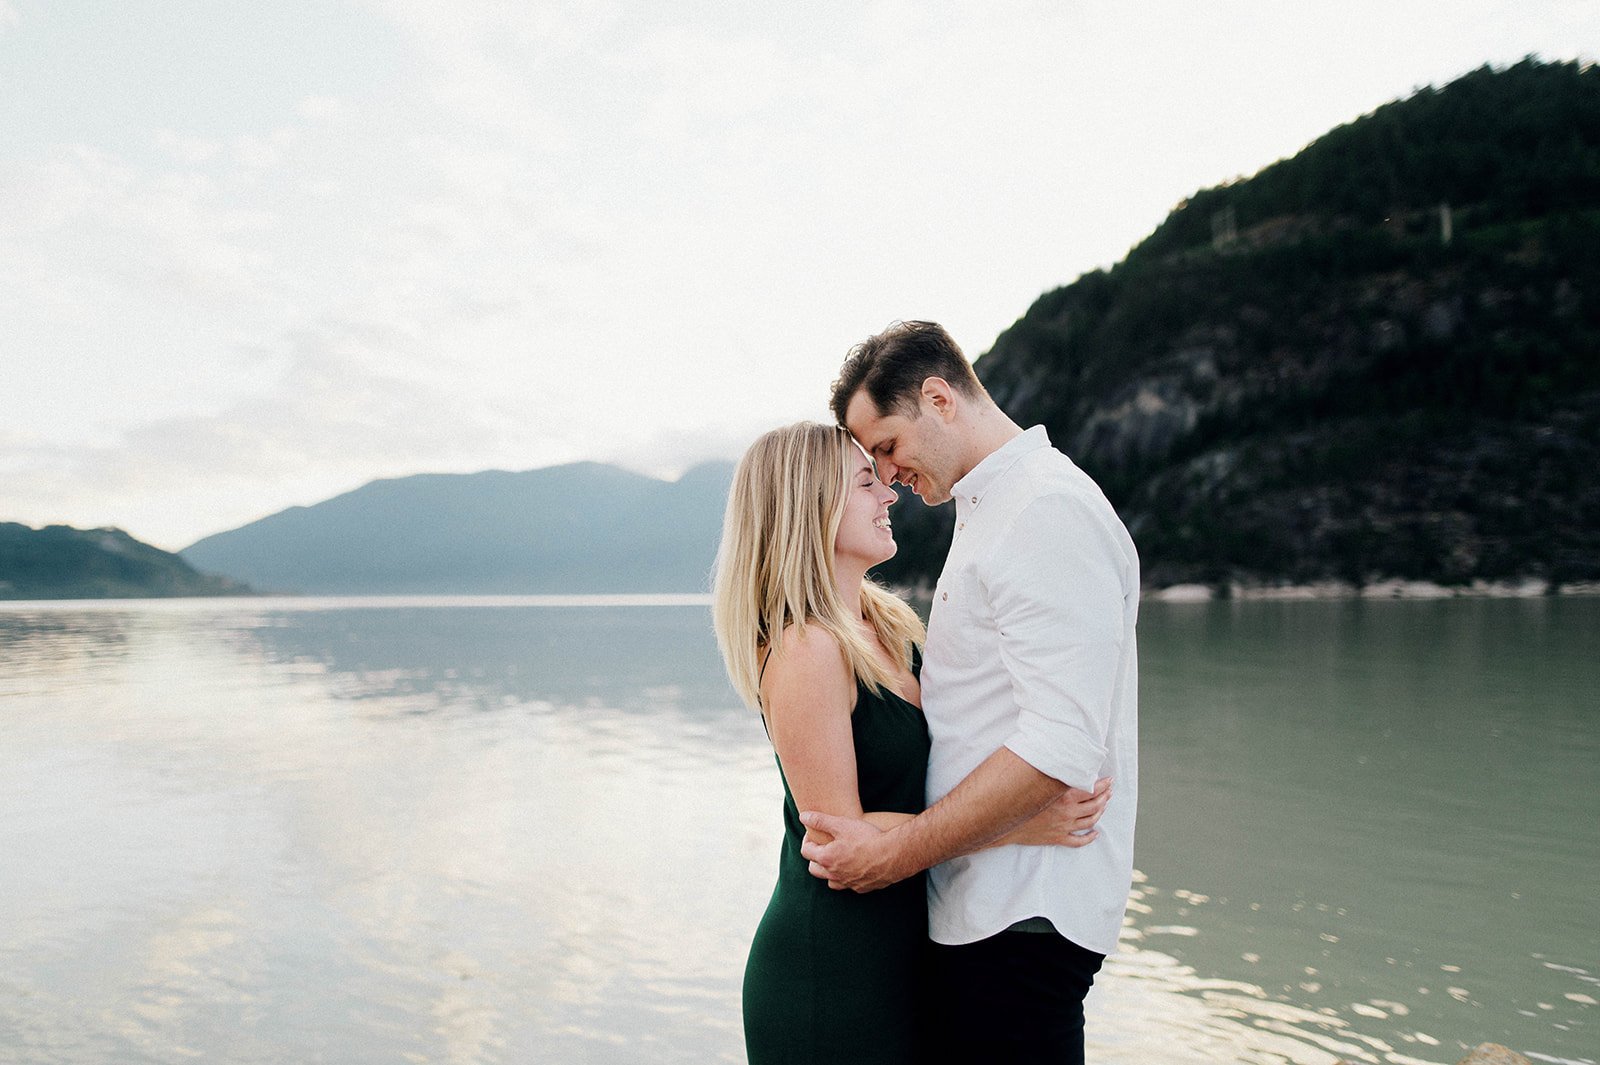 A man and woman embrace in front of a scenic lake surrounded by mountains in Squamish, BC    